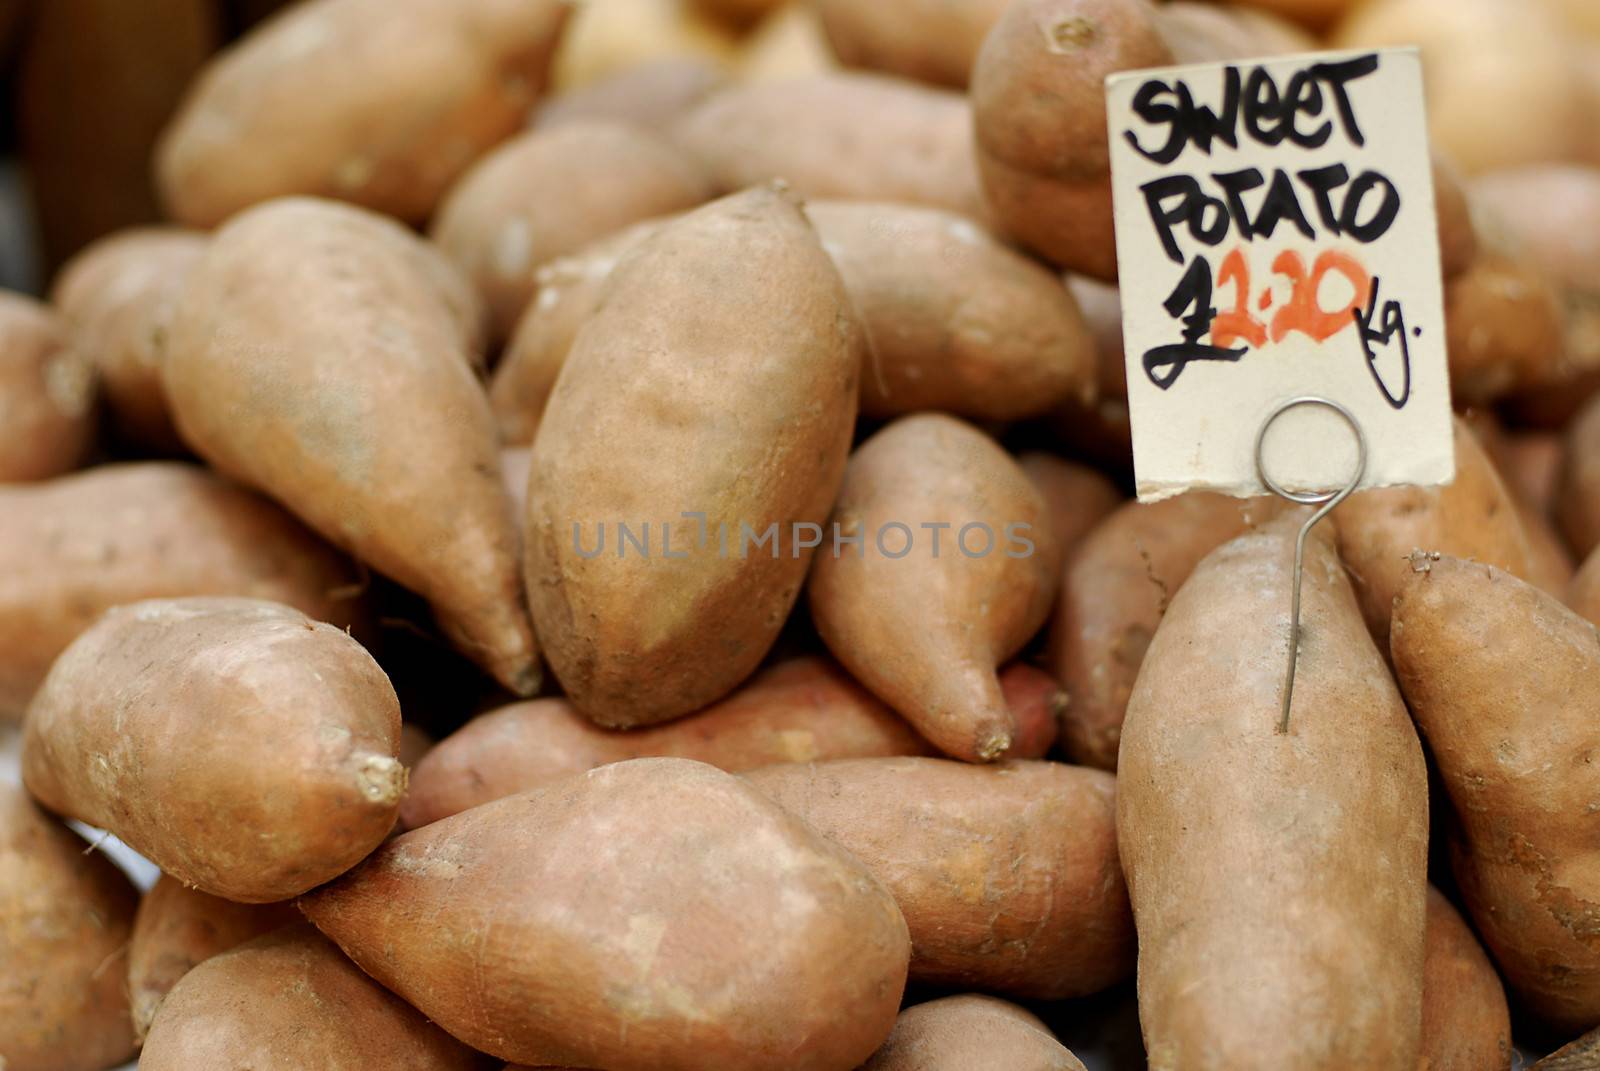 Sweet potatoes at a farmers market priced at 2.20 euro per kg